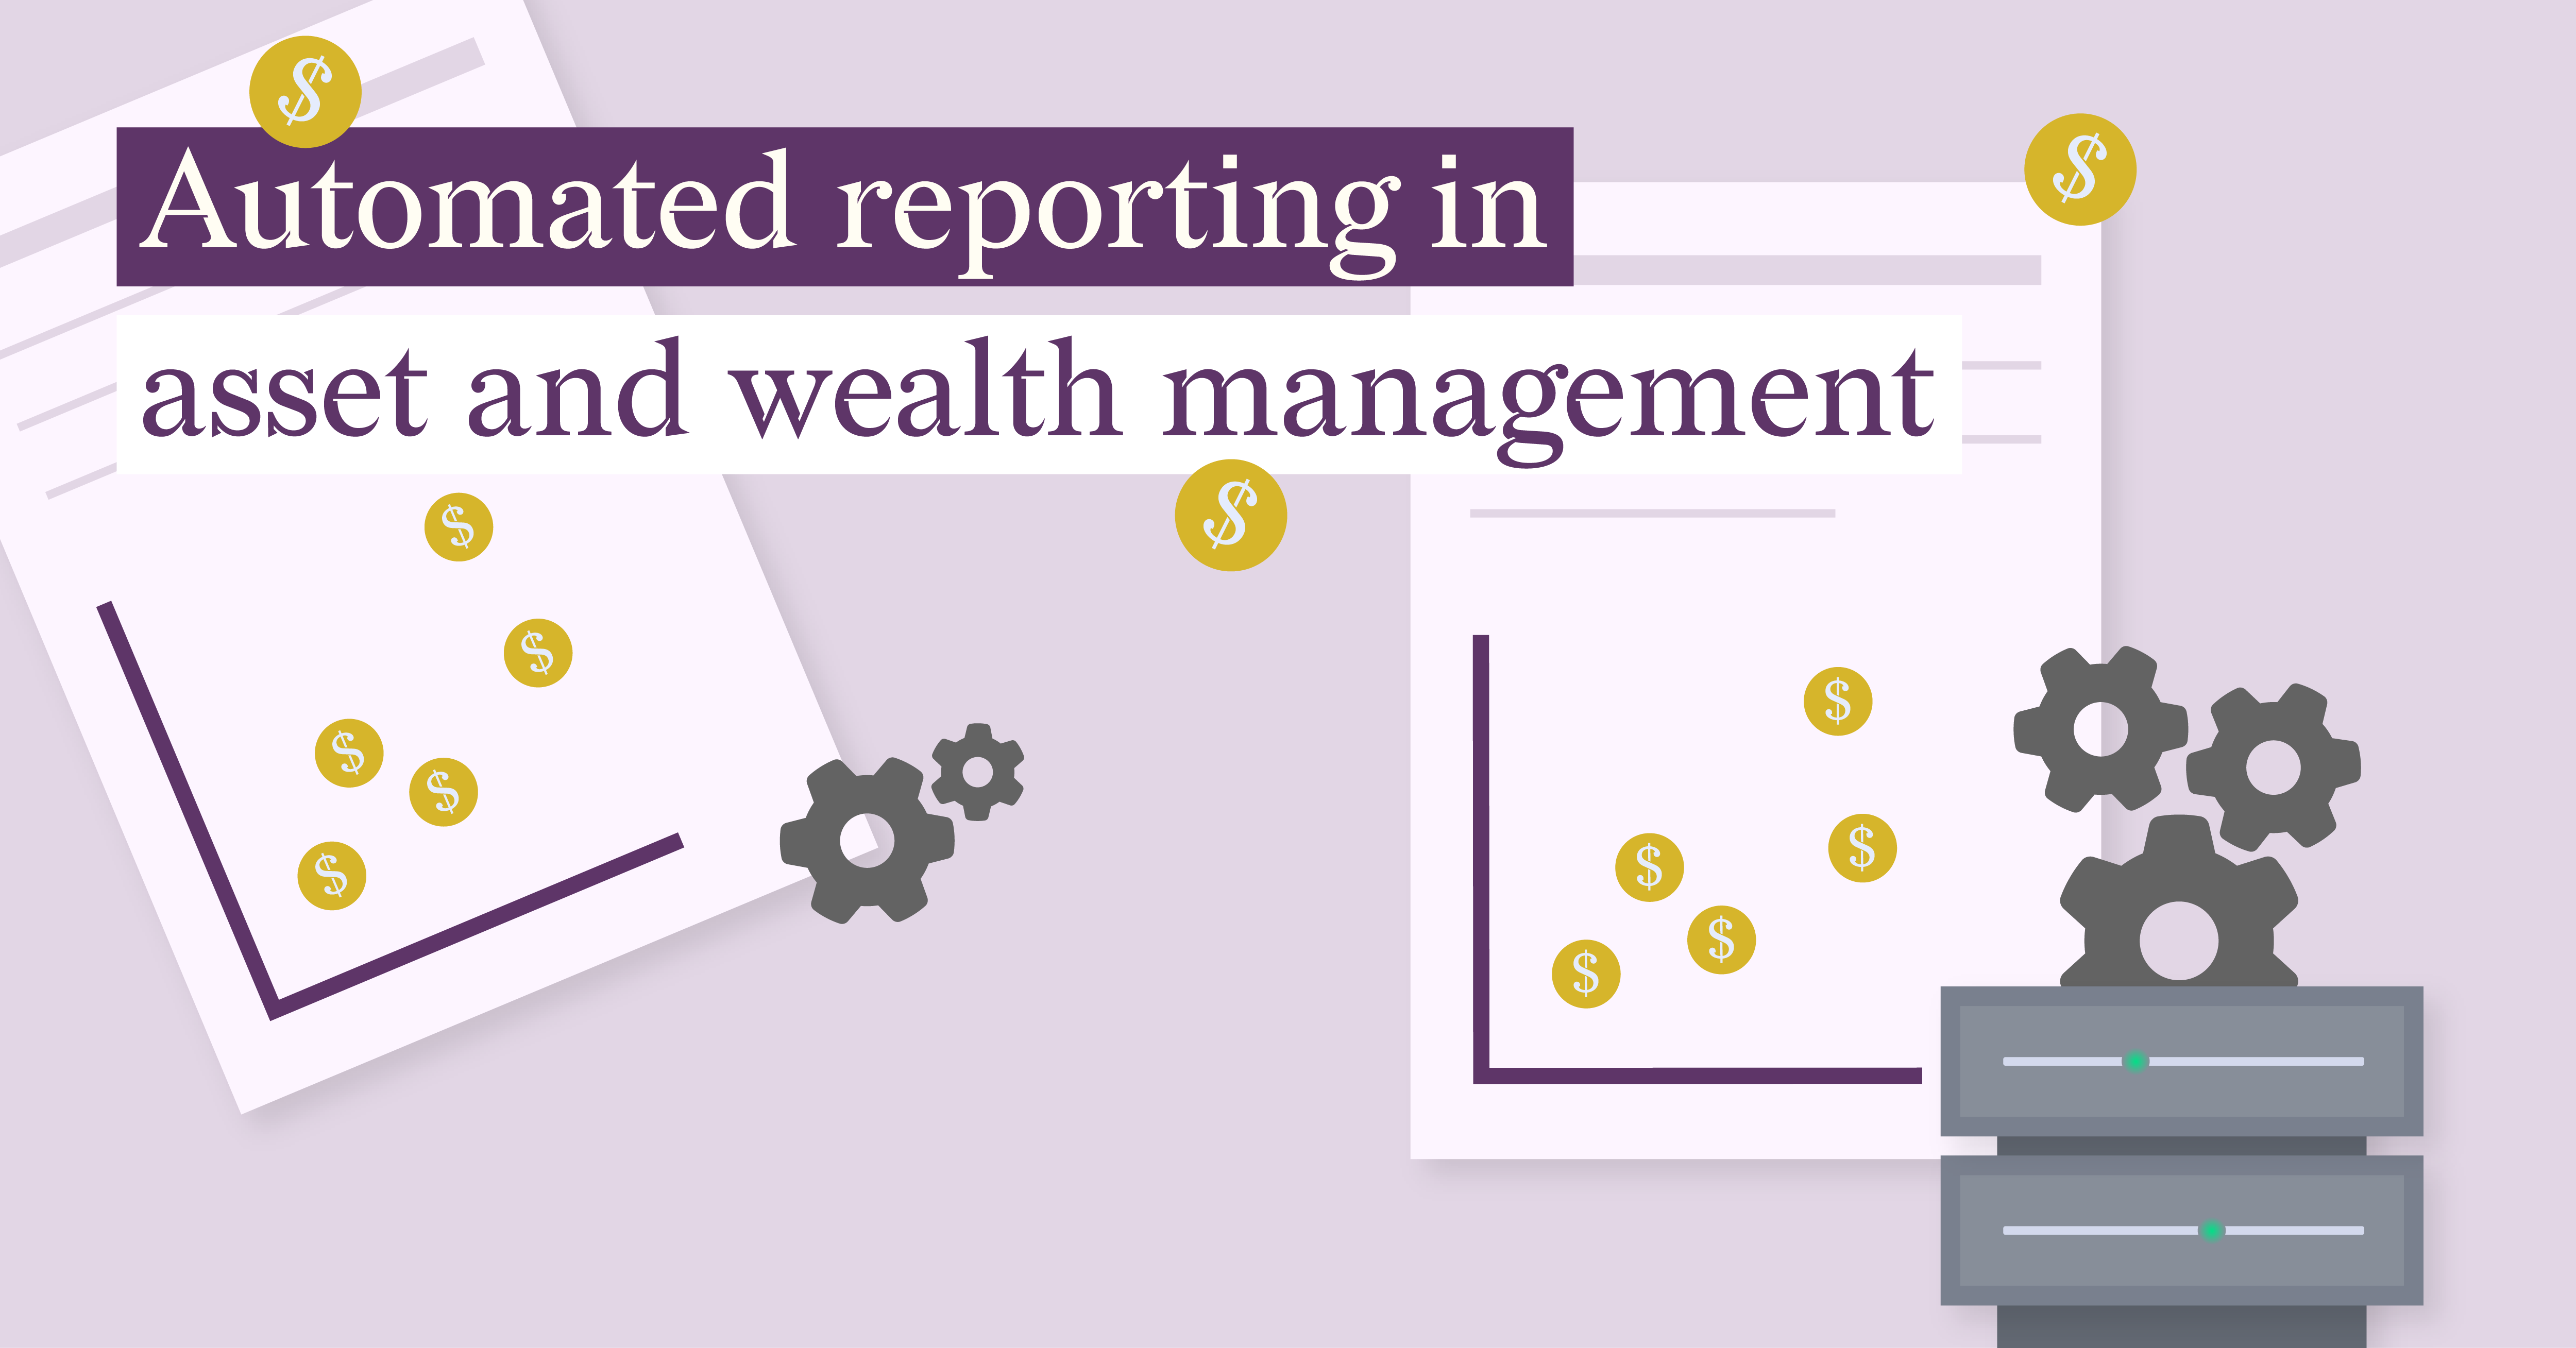 datylon-blog-Automated-Reporting-in-Asset-and-Wealth-Management-Trends-and-Best-Practices-featured-image